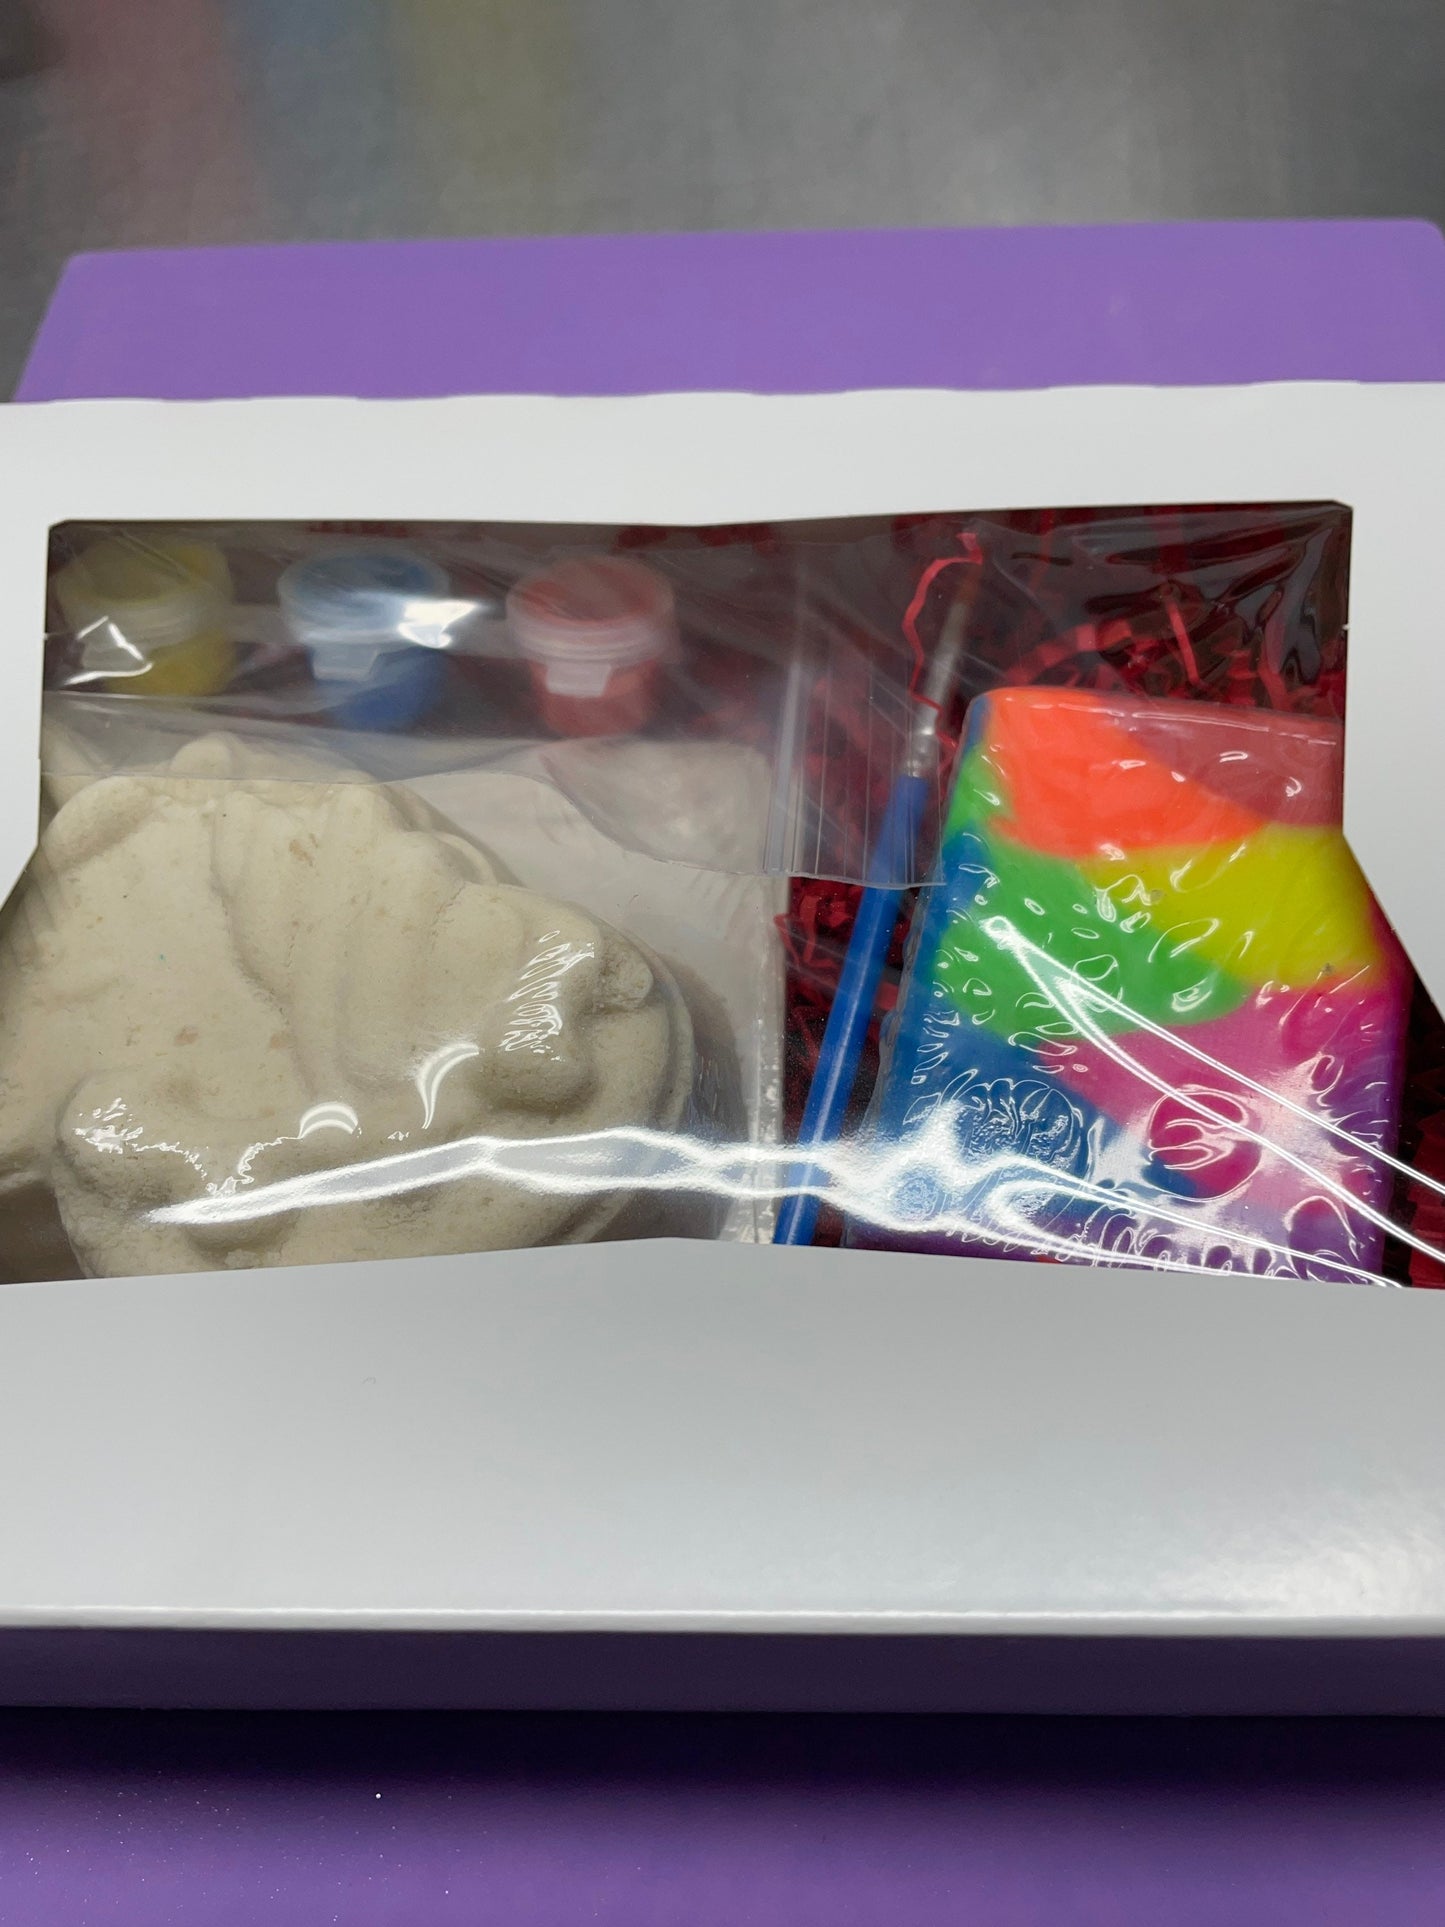 A photo of the gift box with the cover closed.